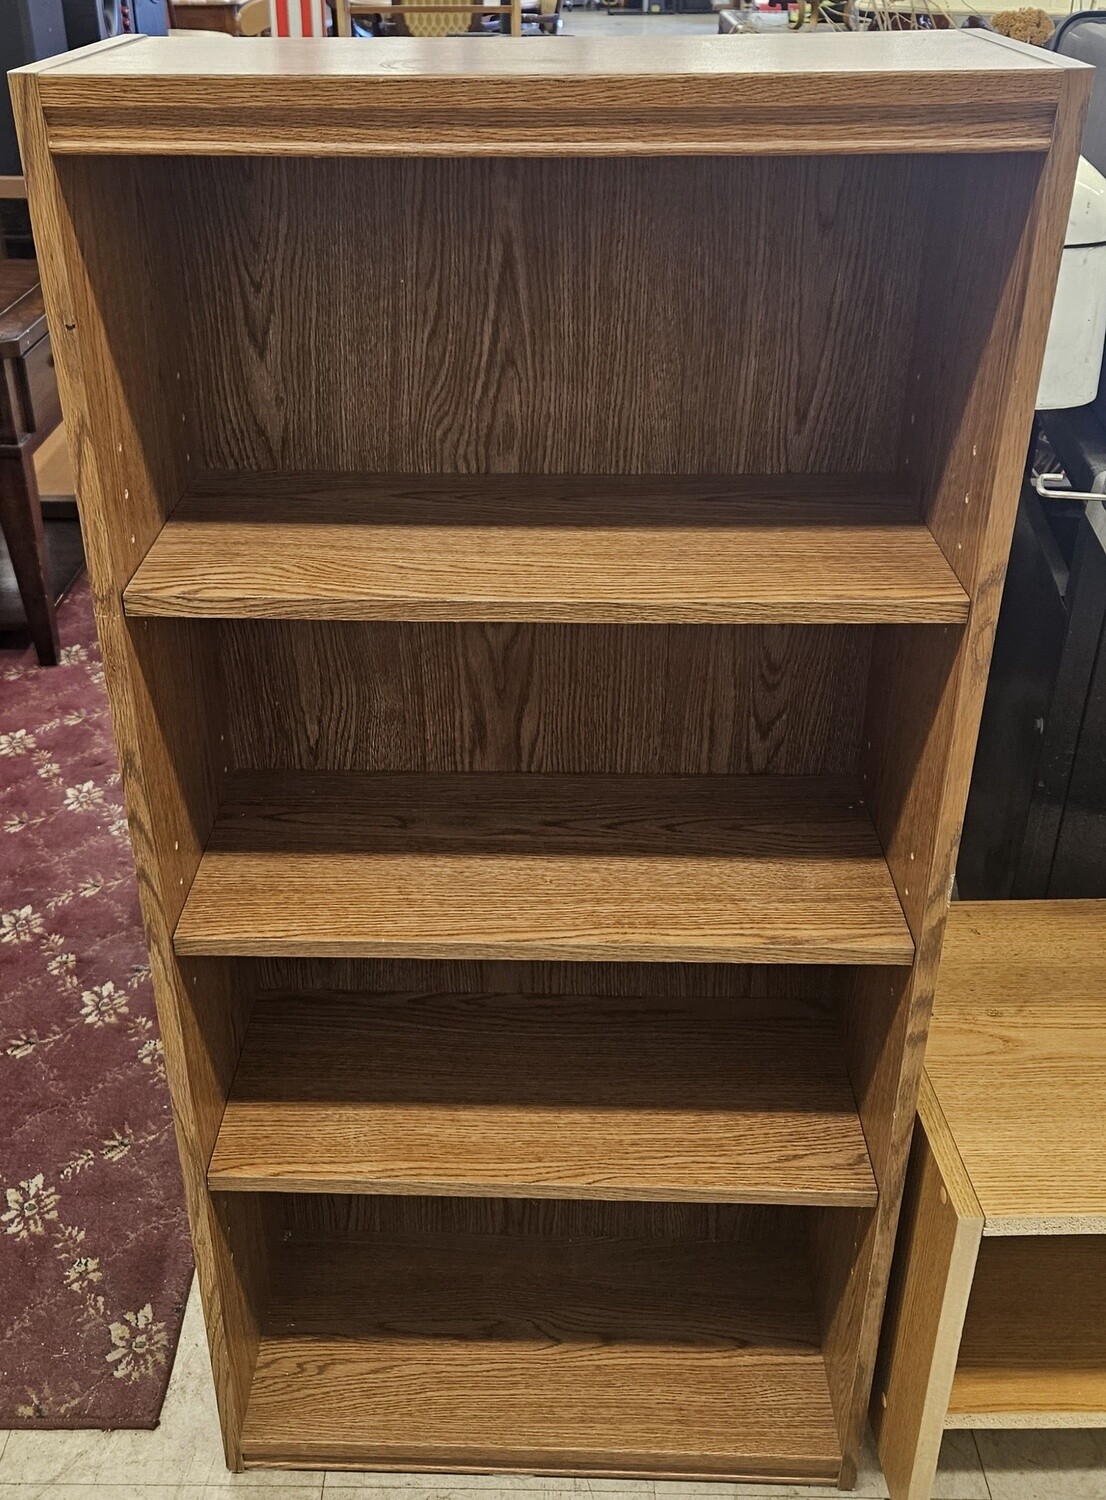 Four Tier Book Stand